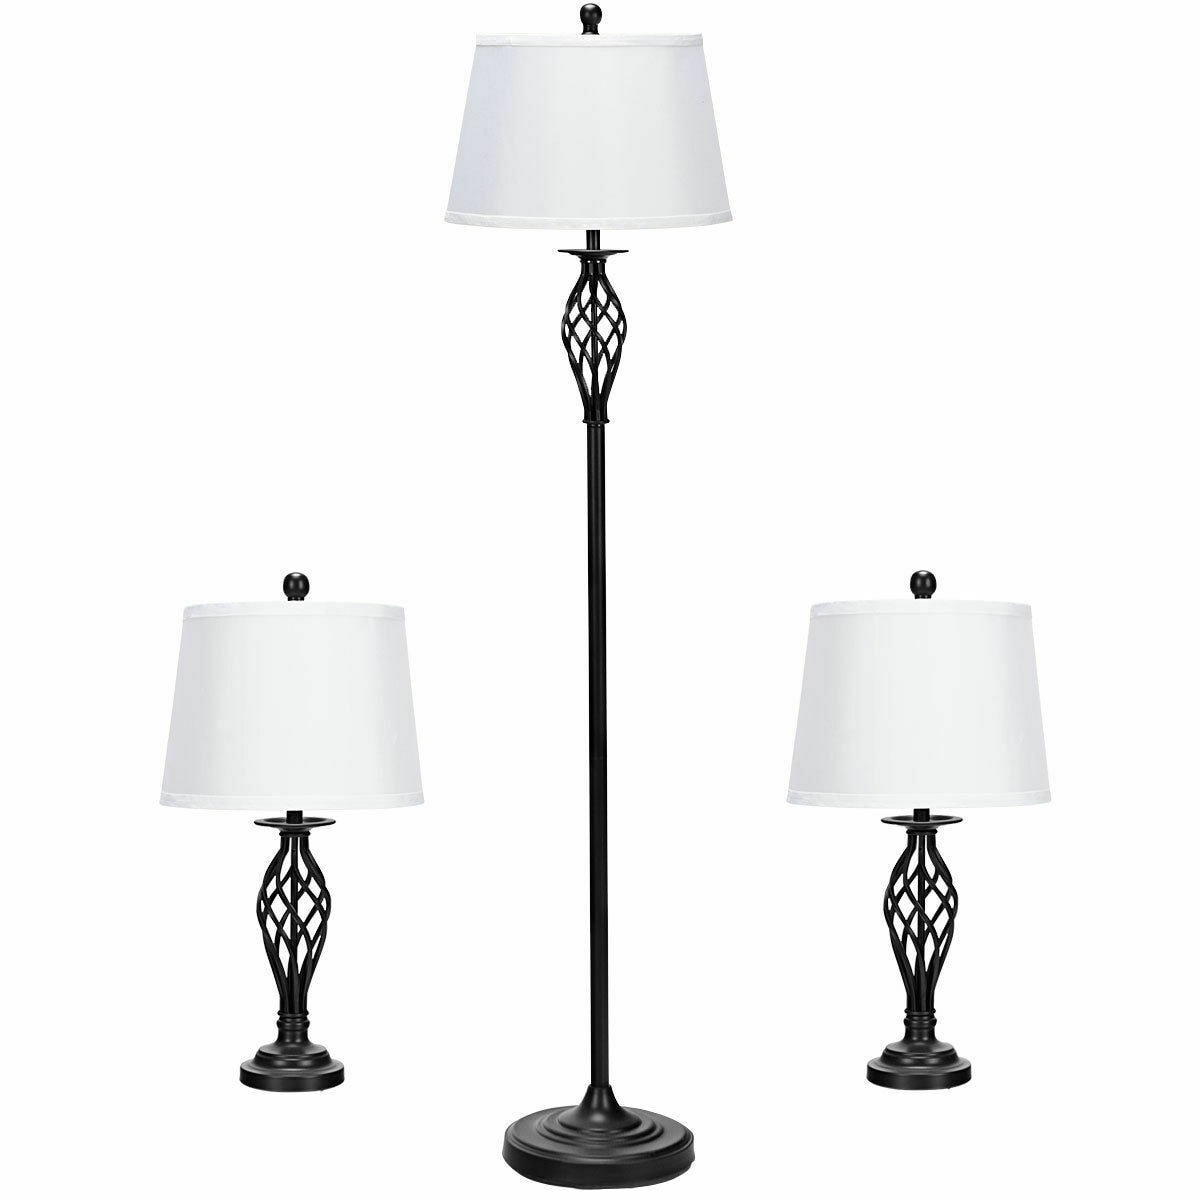 2 Table Lamps 1 Floor Lamp Set with Fabric Shades - Overstock - 33945248